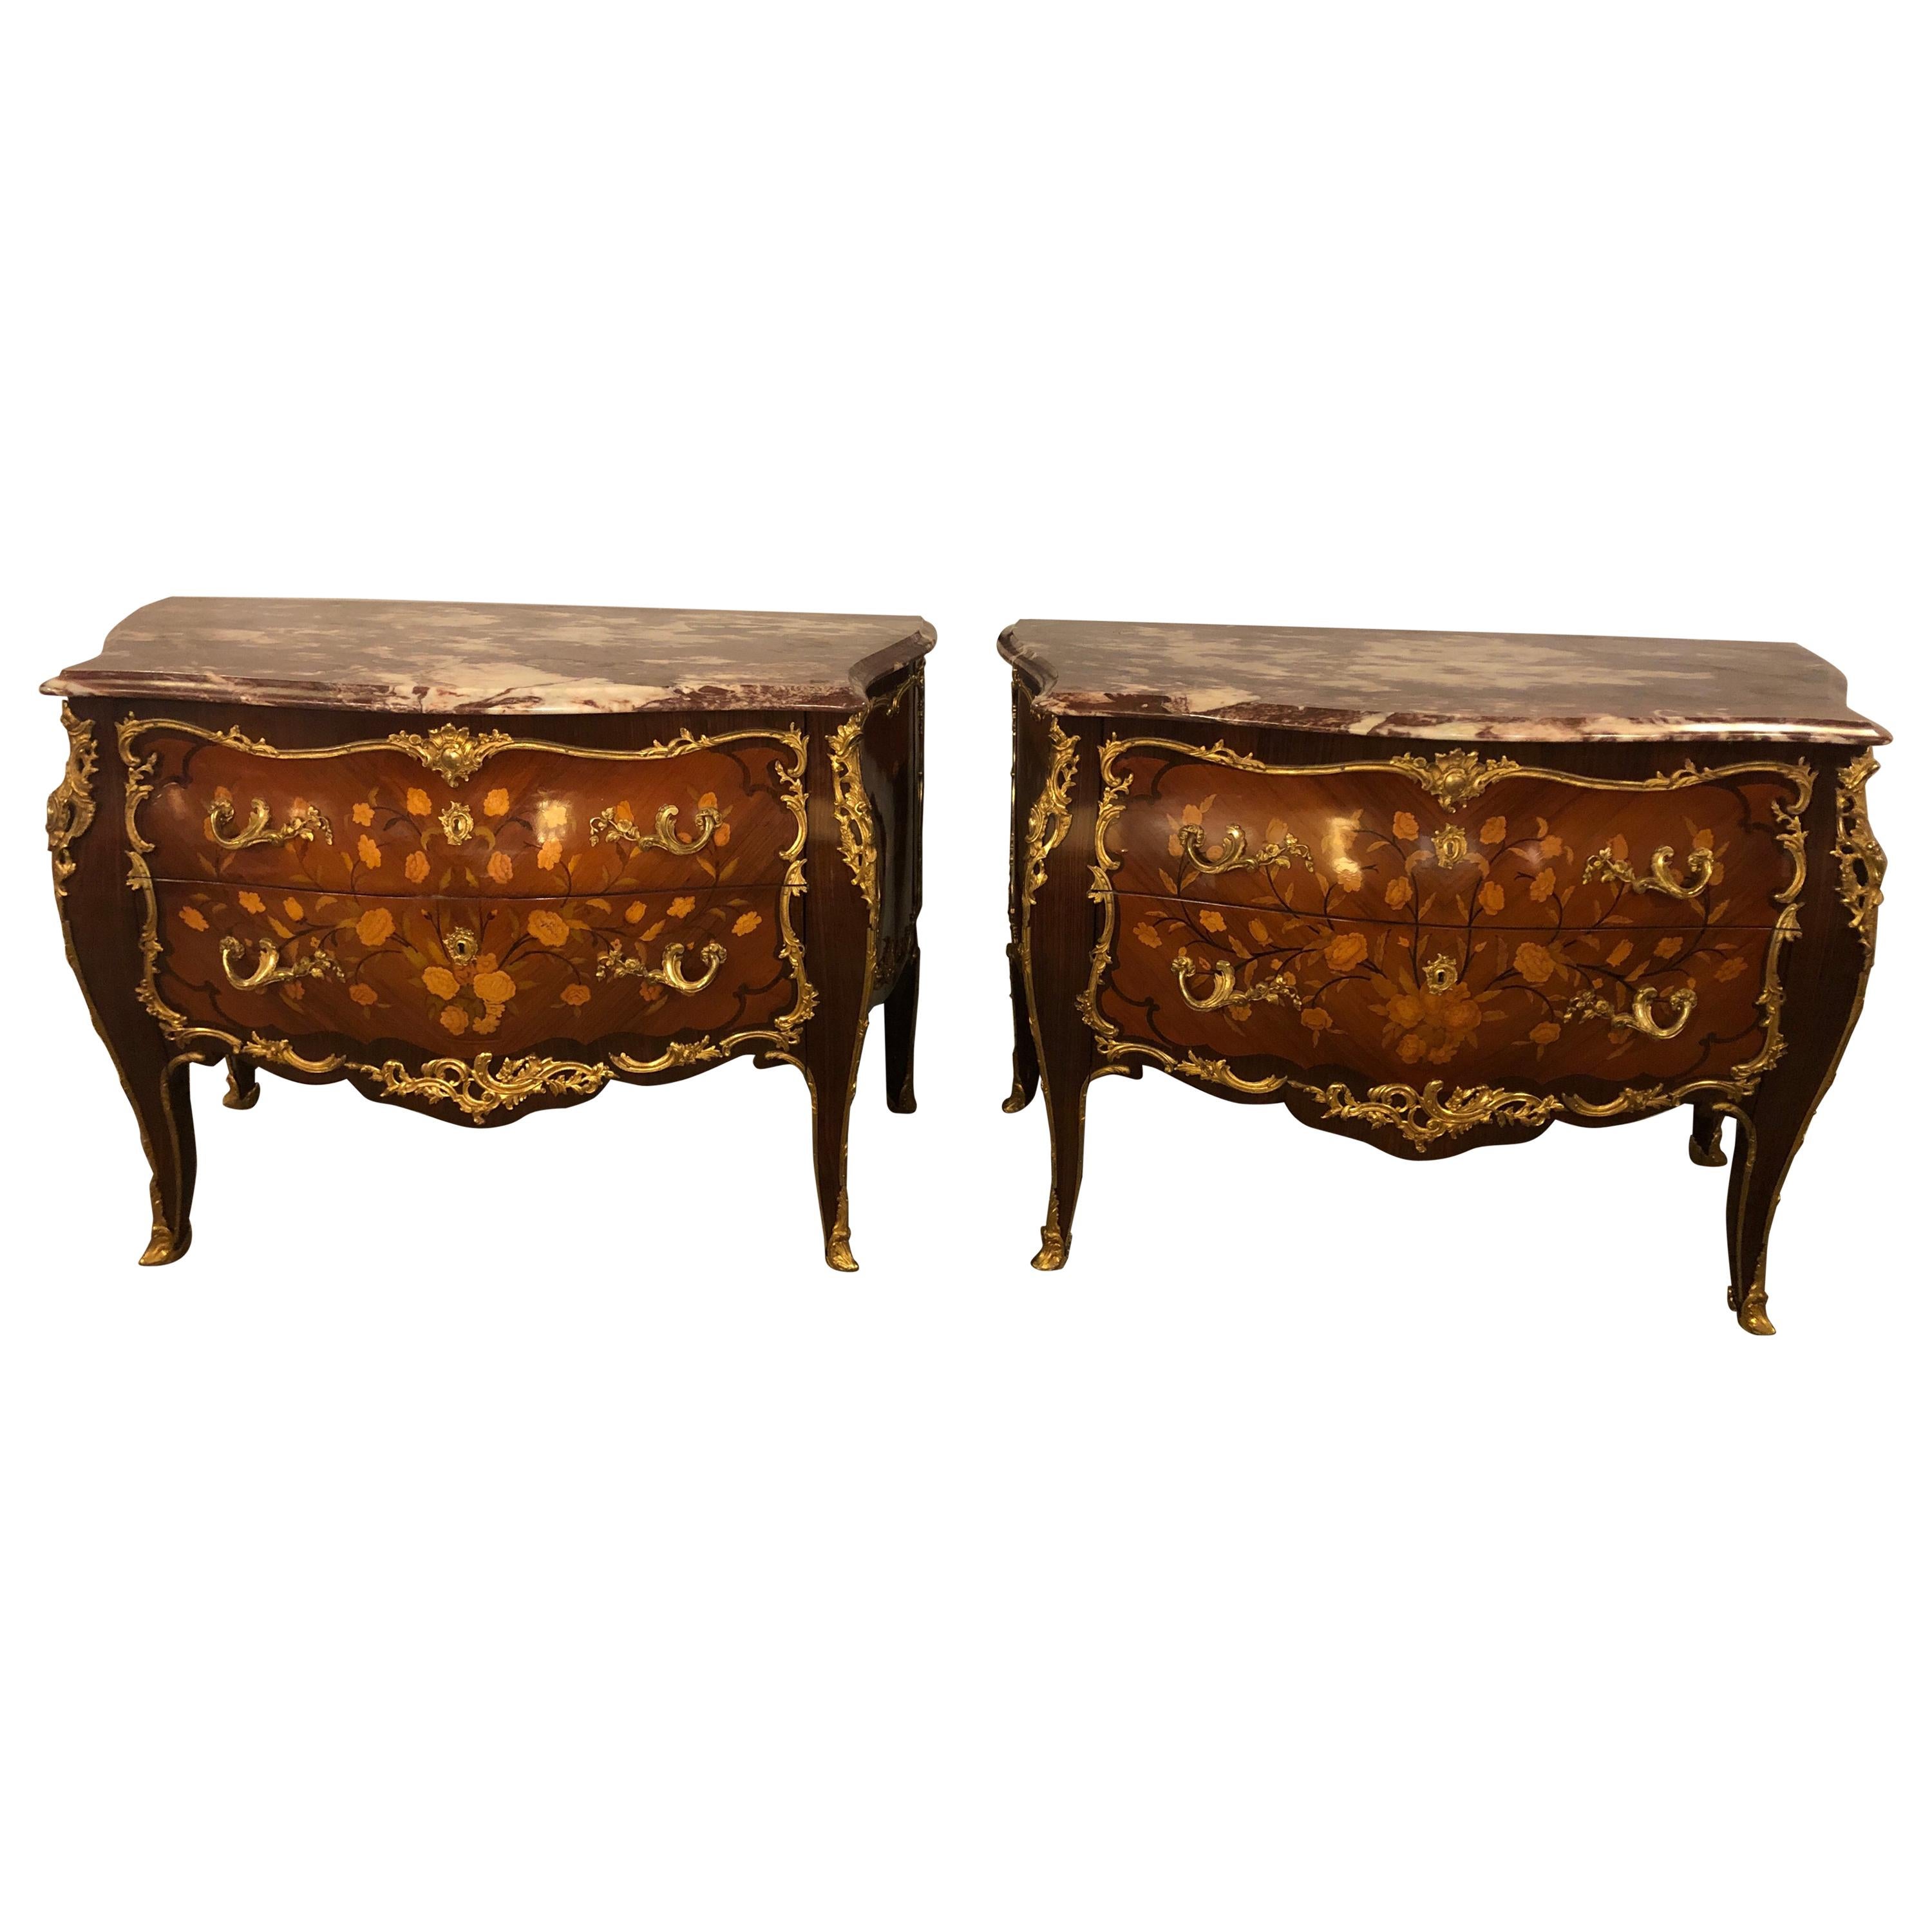 Pair of Marble-Top Bronze Mounted Bombe Floral Inlaid Louis XV Style Commodes